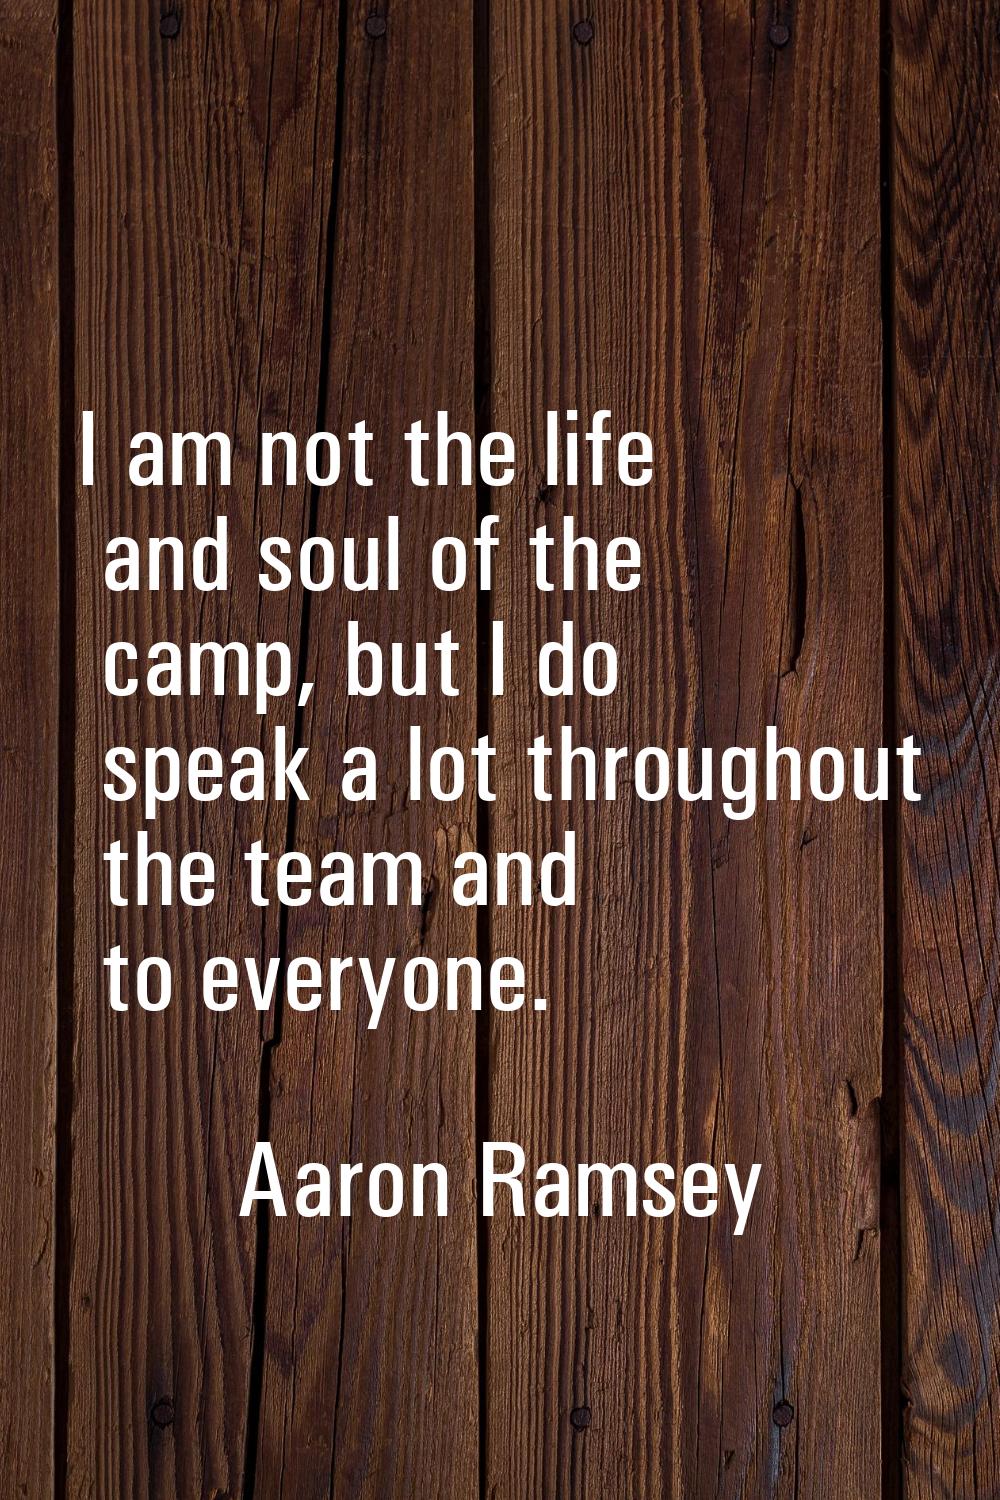 I am not the life and soul of the camp, but I do speak a lot throughout the team and to everyone.